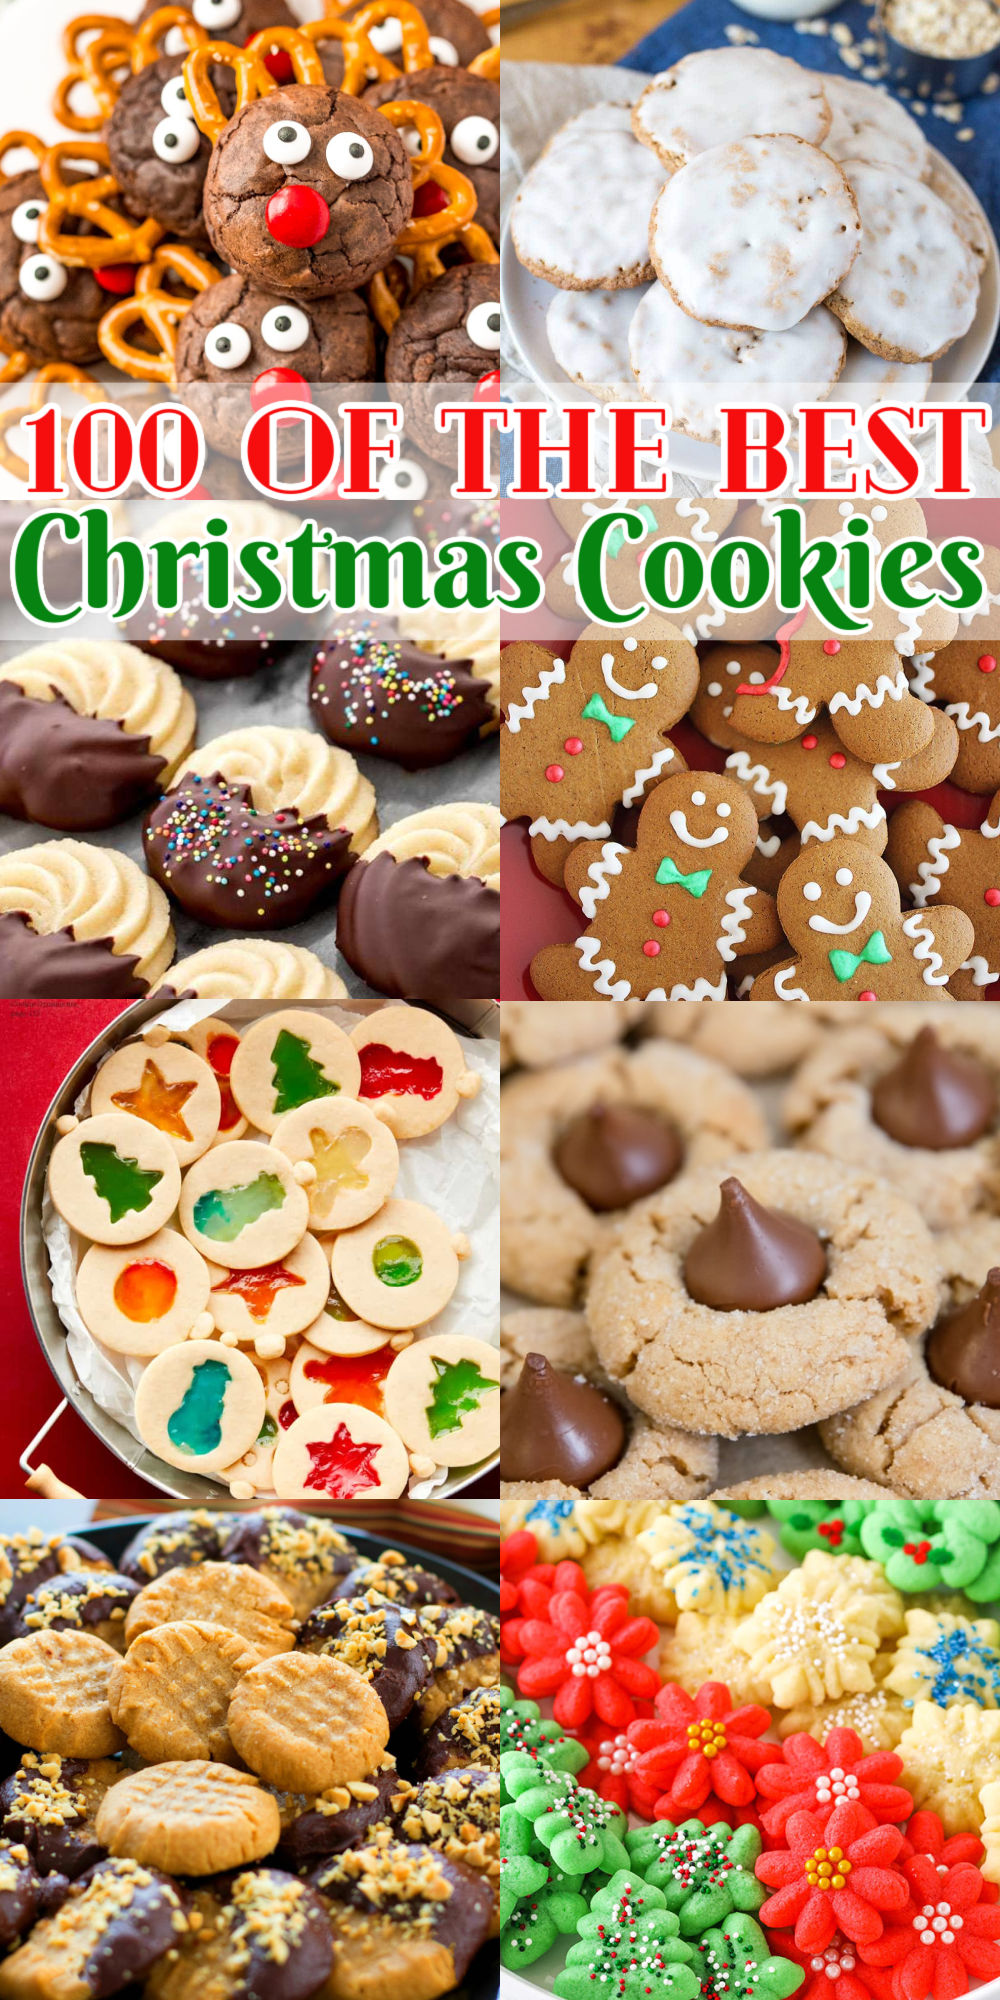 100 of the Best Christmas Cookies 